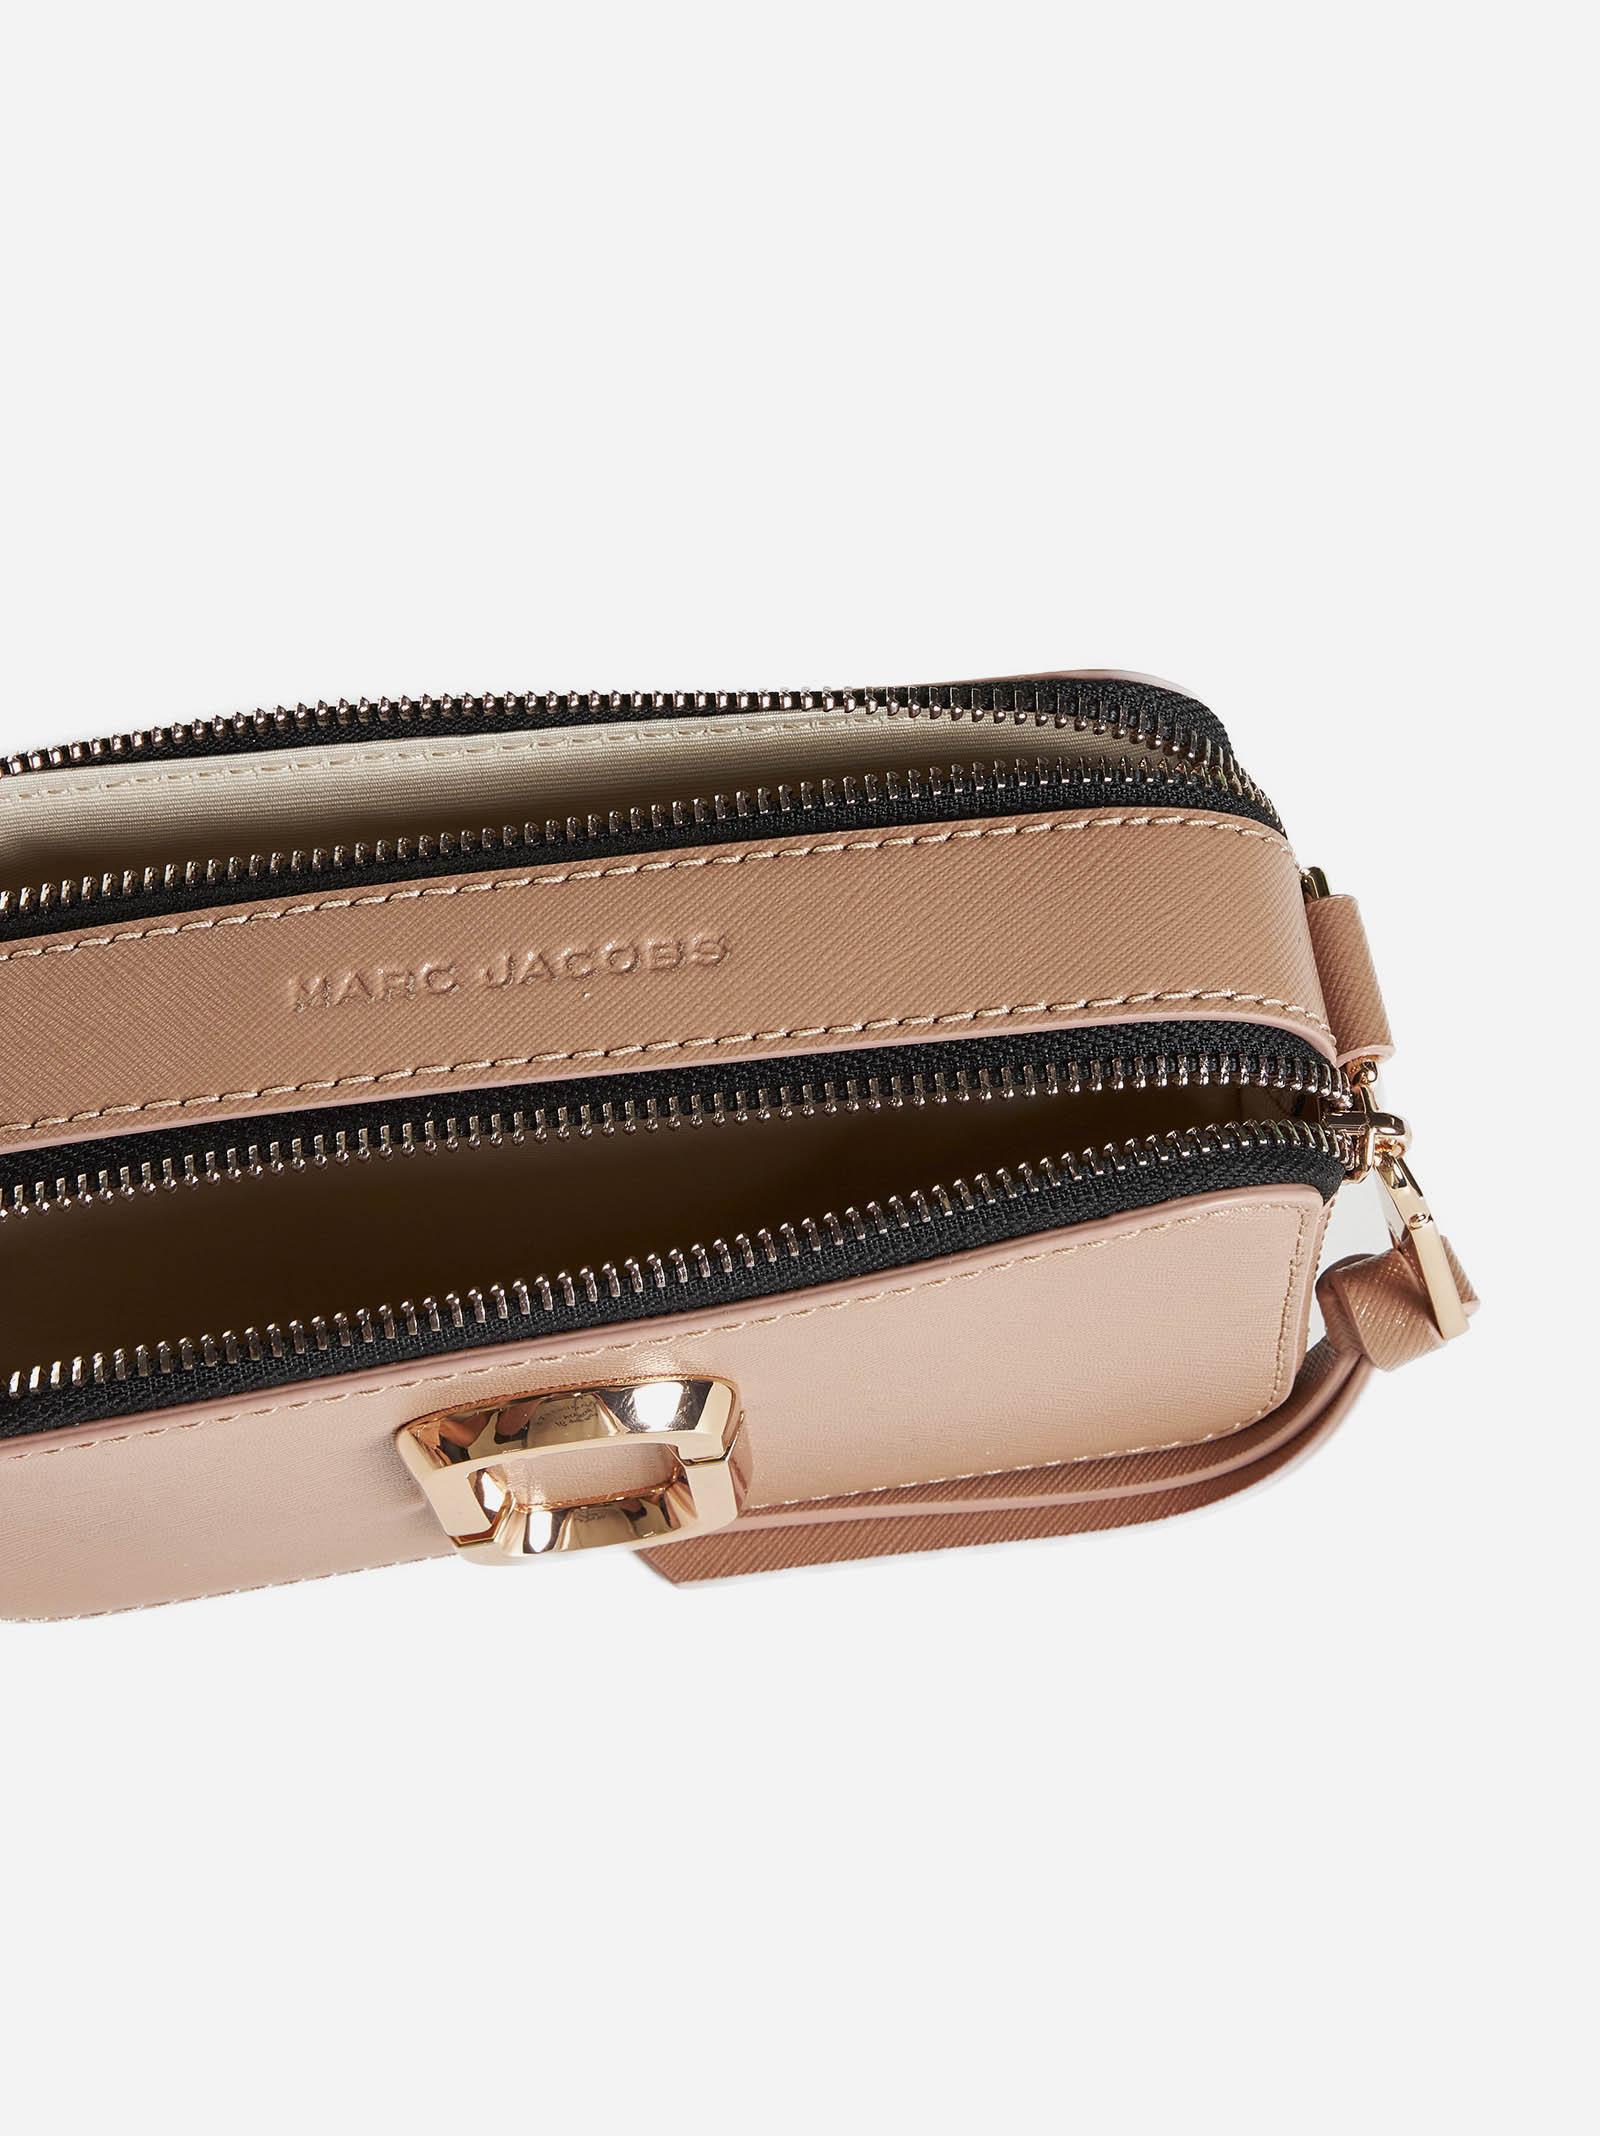 Pink Marc Jacobs Snapshot Bag: Style Meets Functionality - Bioleather